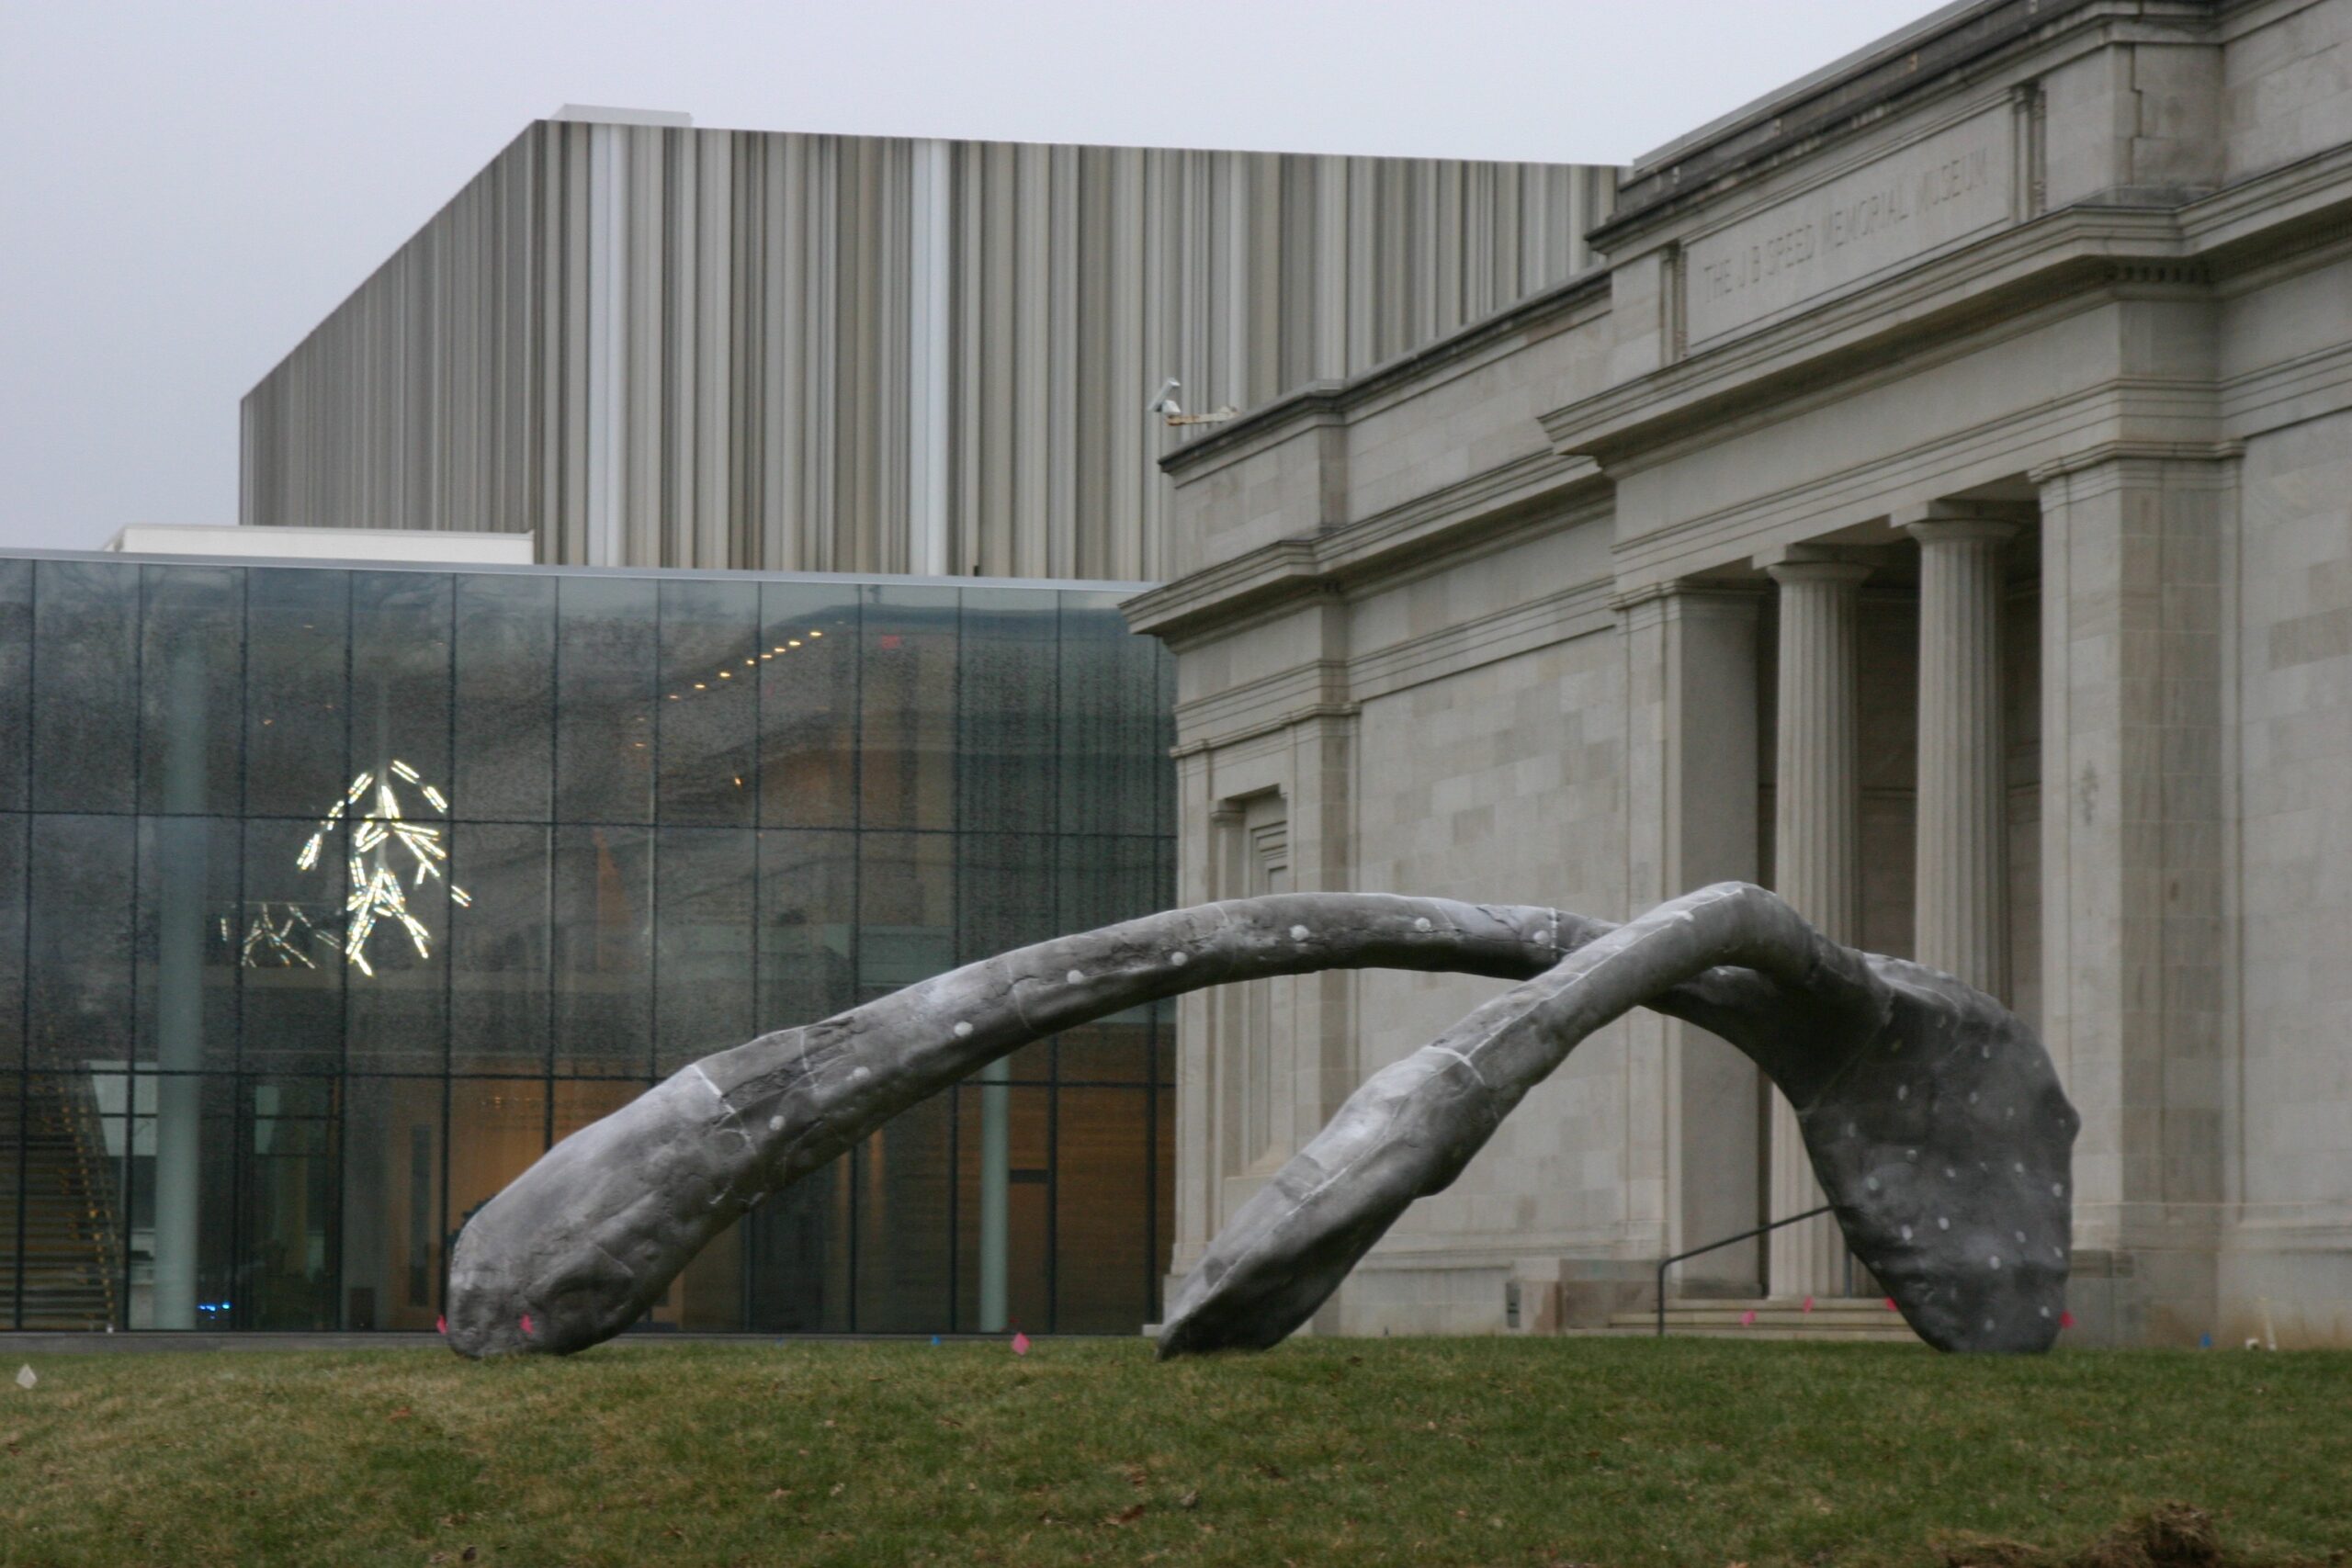 Speed Art Museum's new north building and wishbone sculpture.